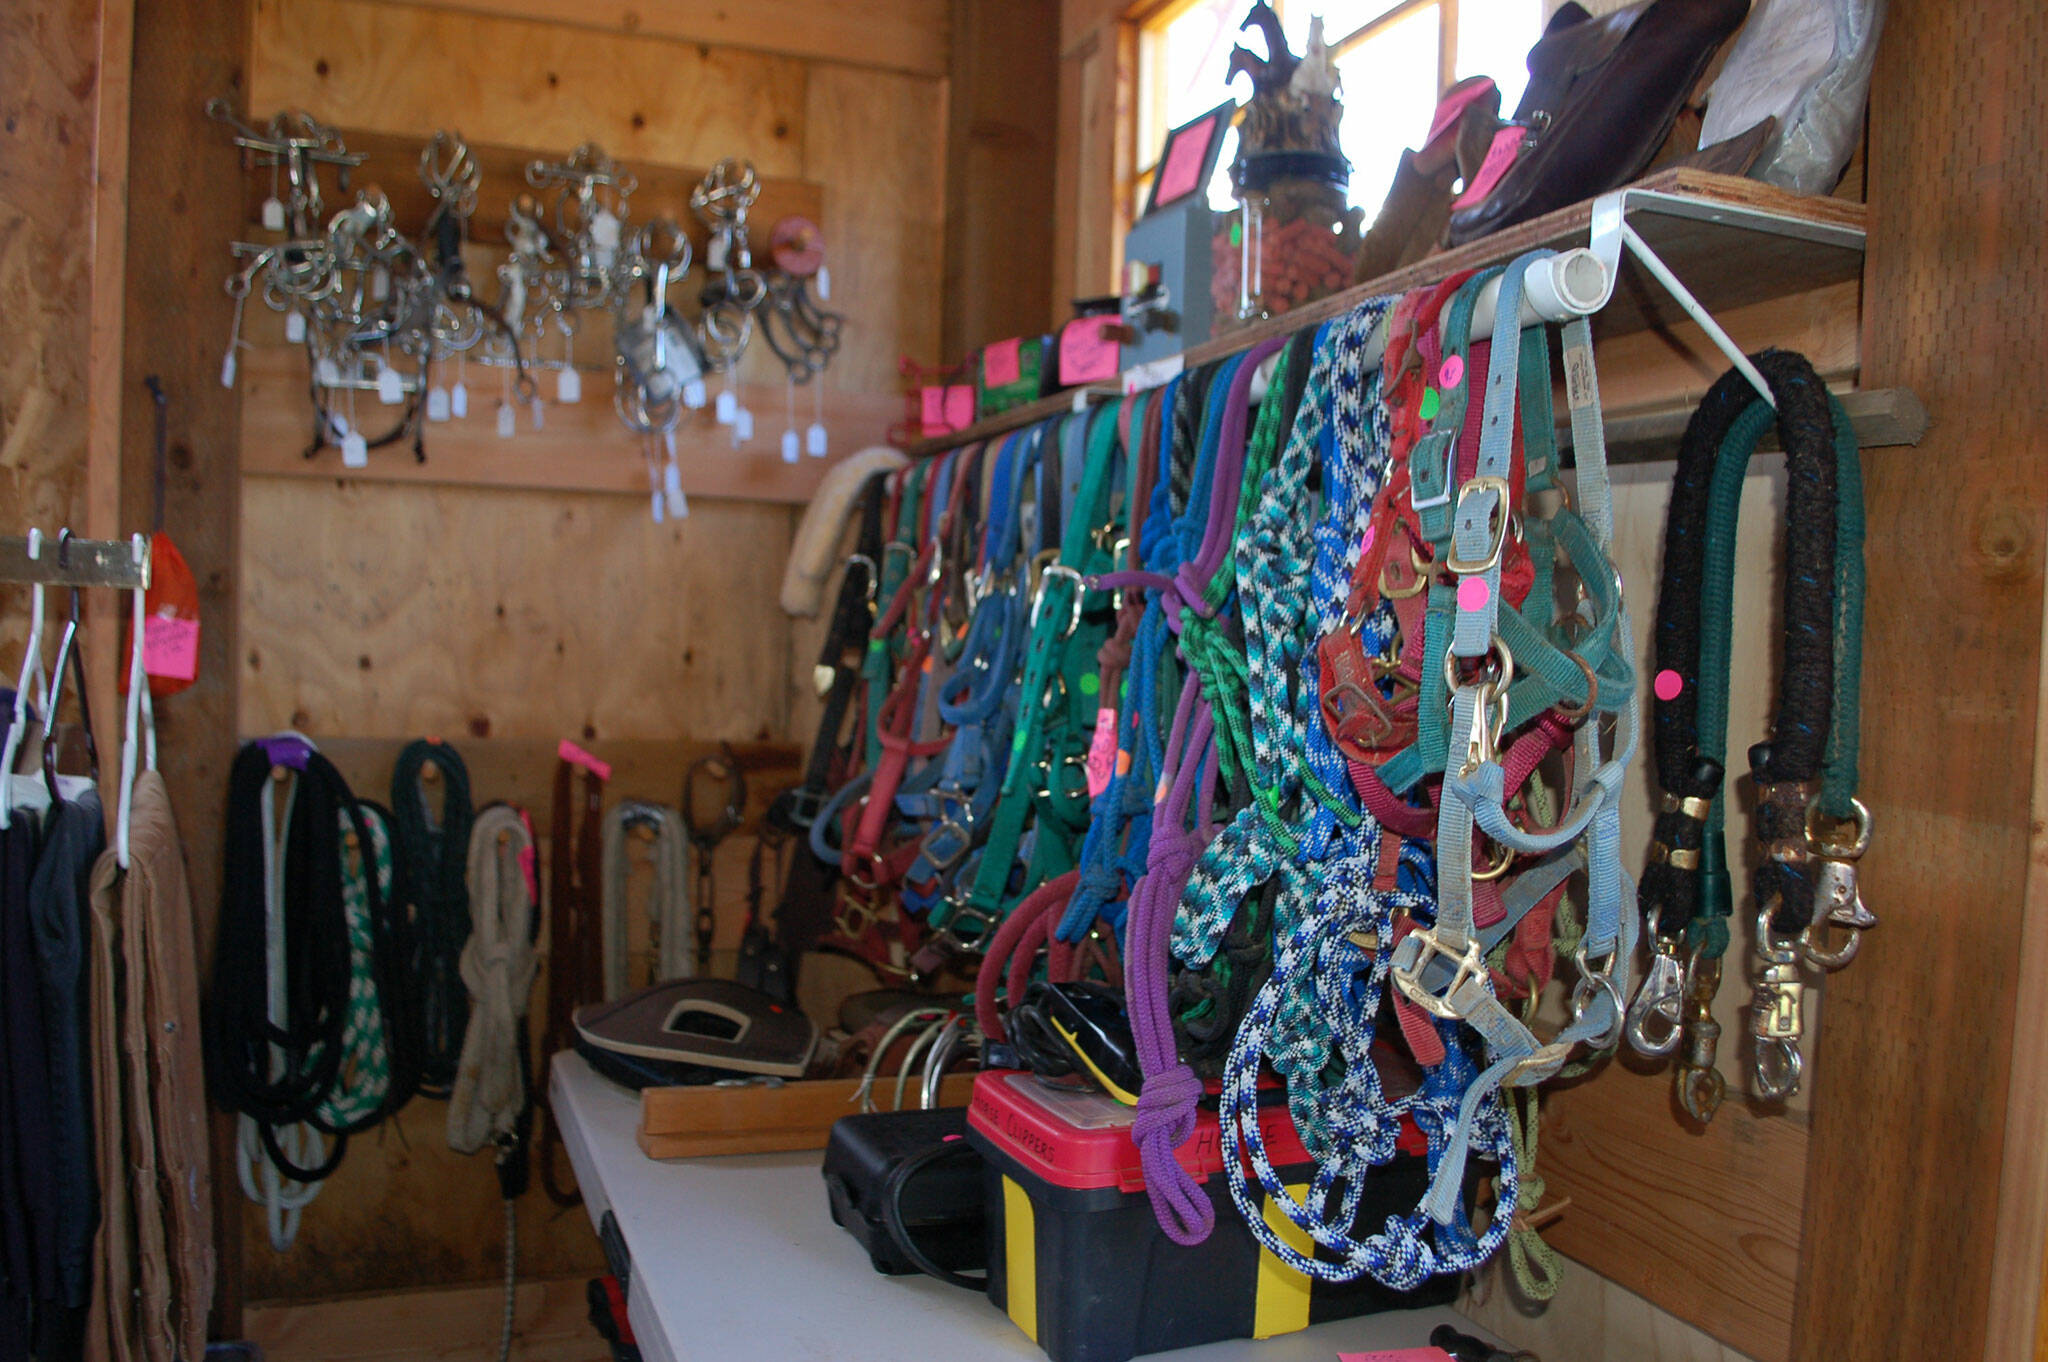 The Olympic Peninsula Equine Network' new Western Treasures and Used Tack store offers western clothing, jewelry, decor and horse equipment for sale by donation that will serve as an ongoing fundraiser for the nonprofit. Sequim Gazette photo by Erin Hawkins